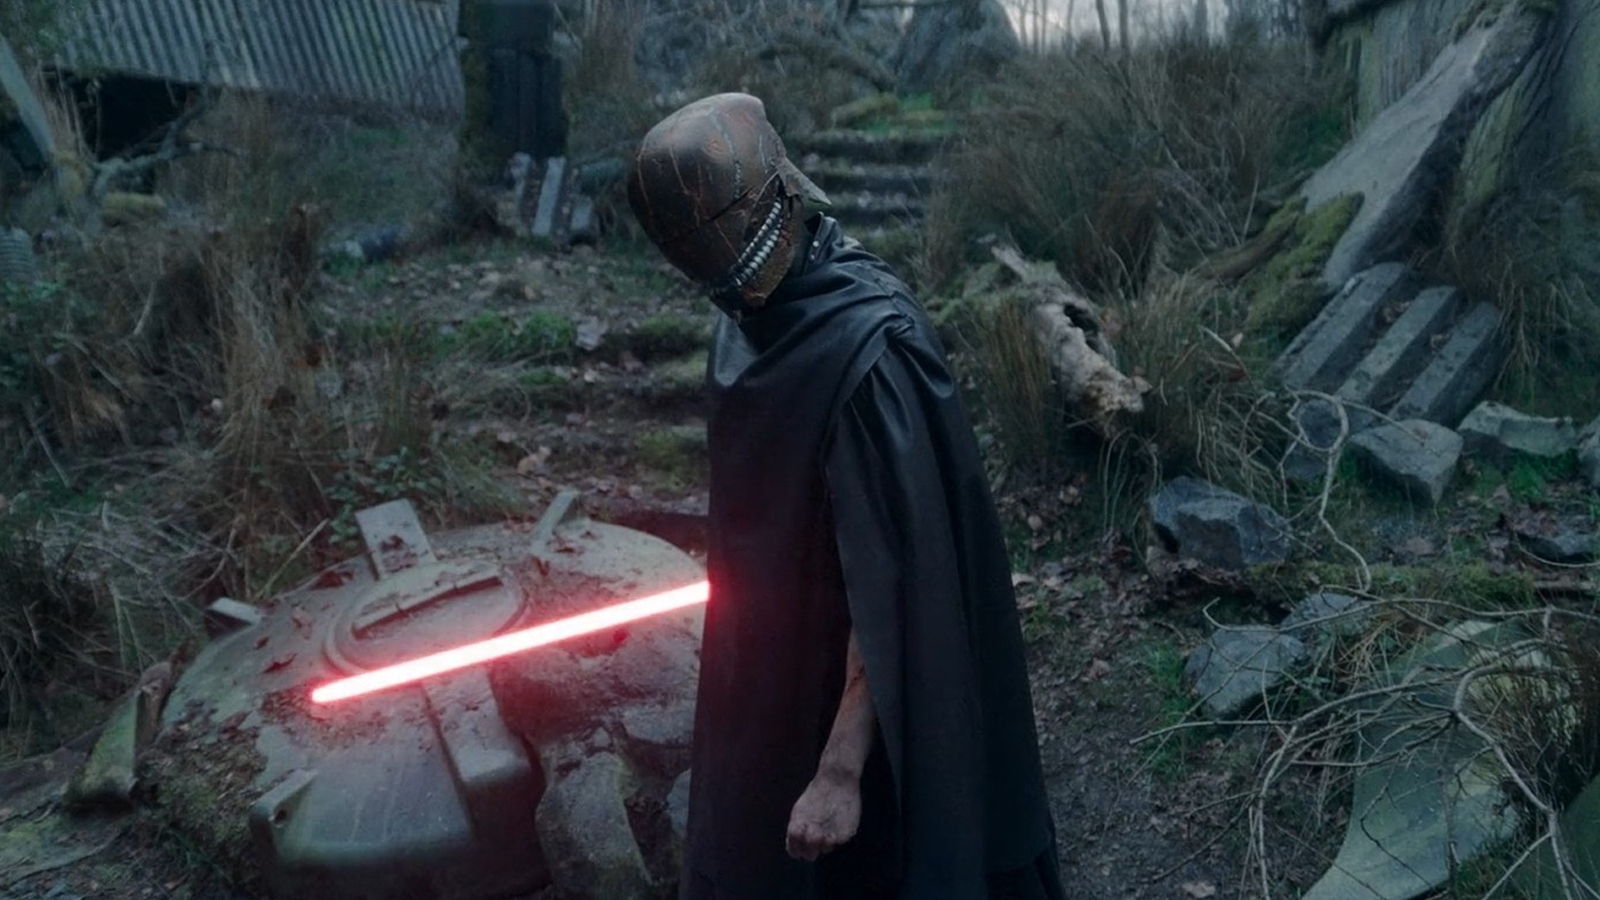 Qimir/The Stranger with his red lightsaber in The Acolyte Season 1, Episode 8